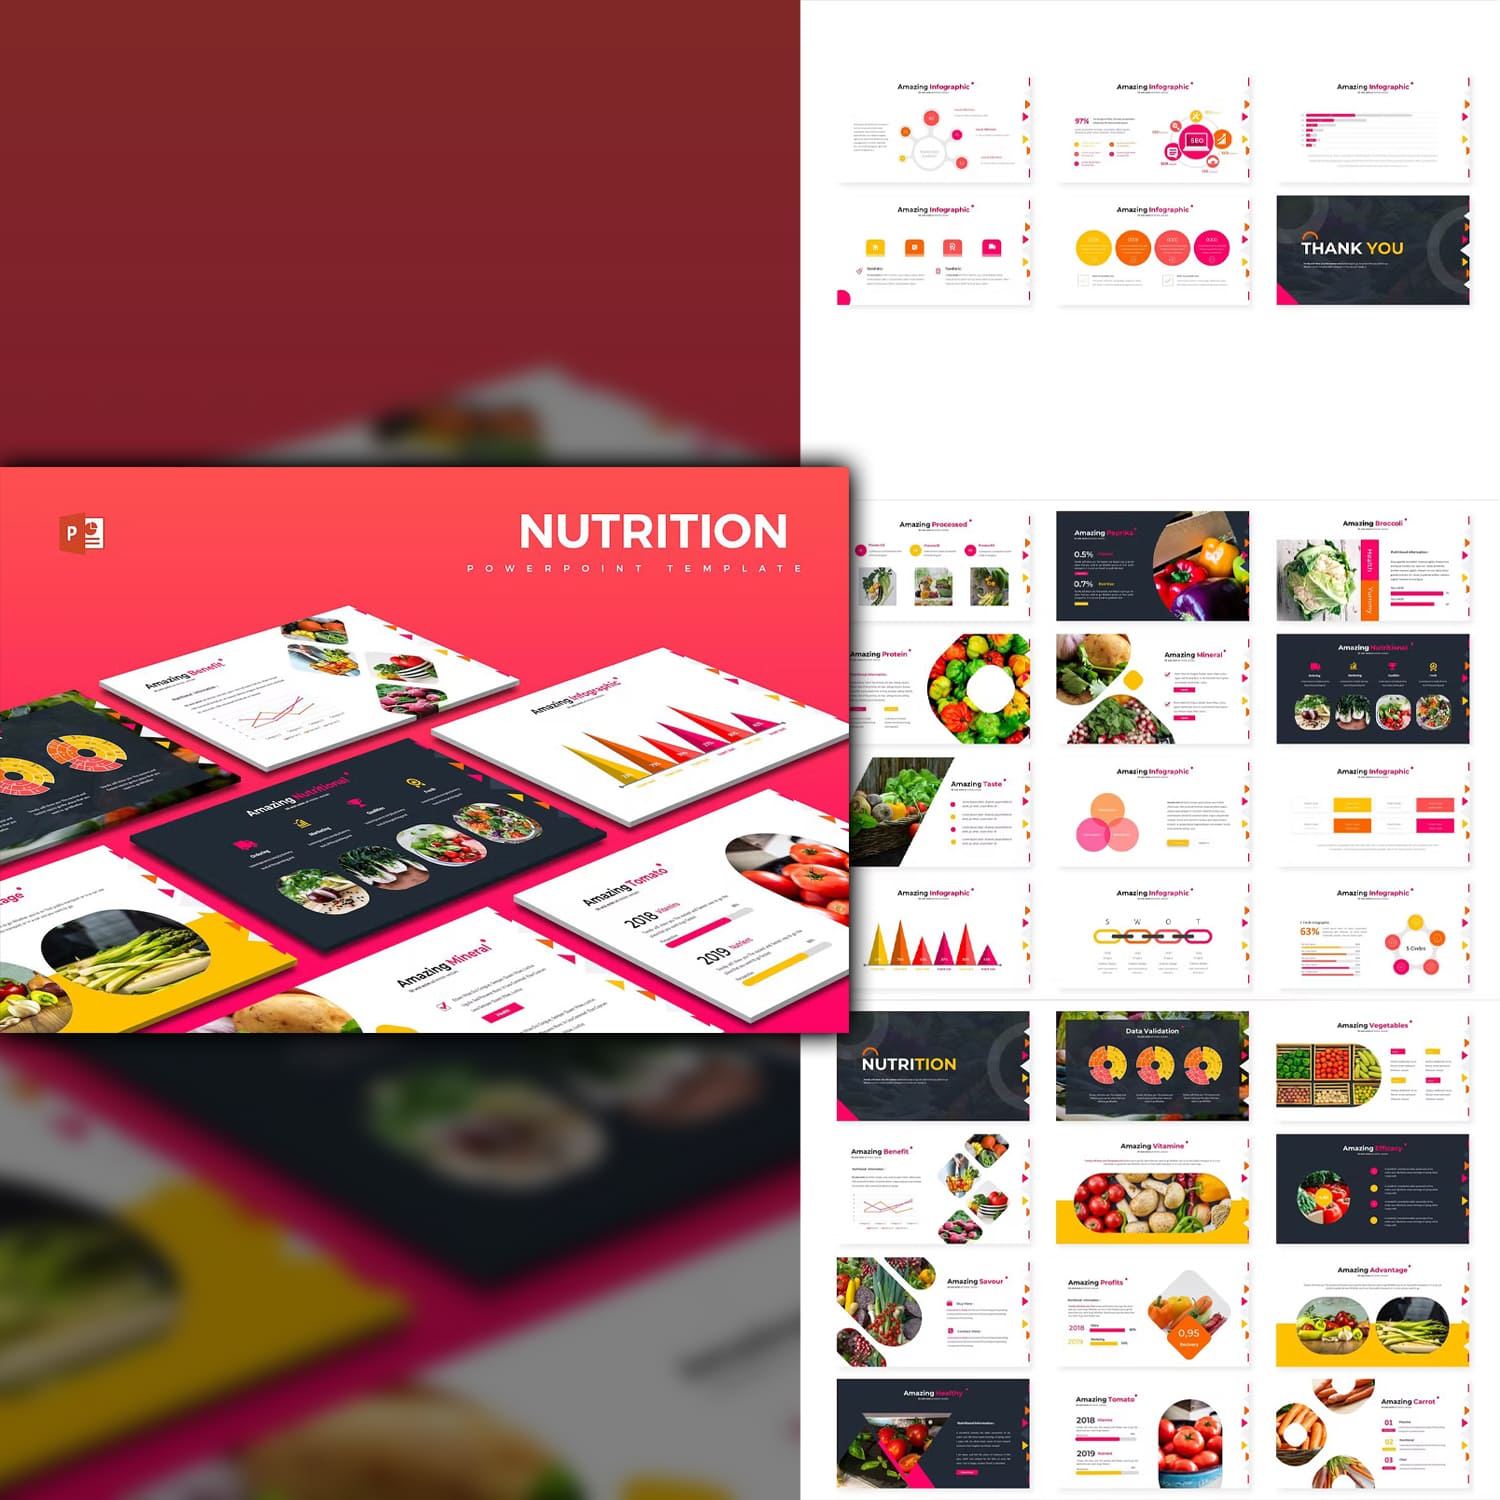 Nutrition powerpoint template from aqrstudio.